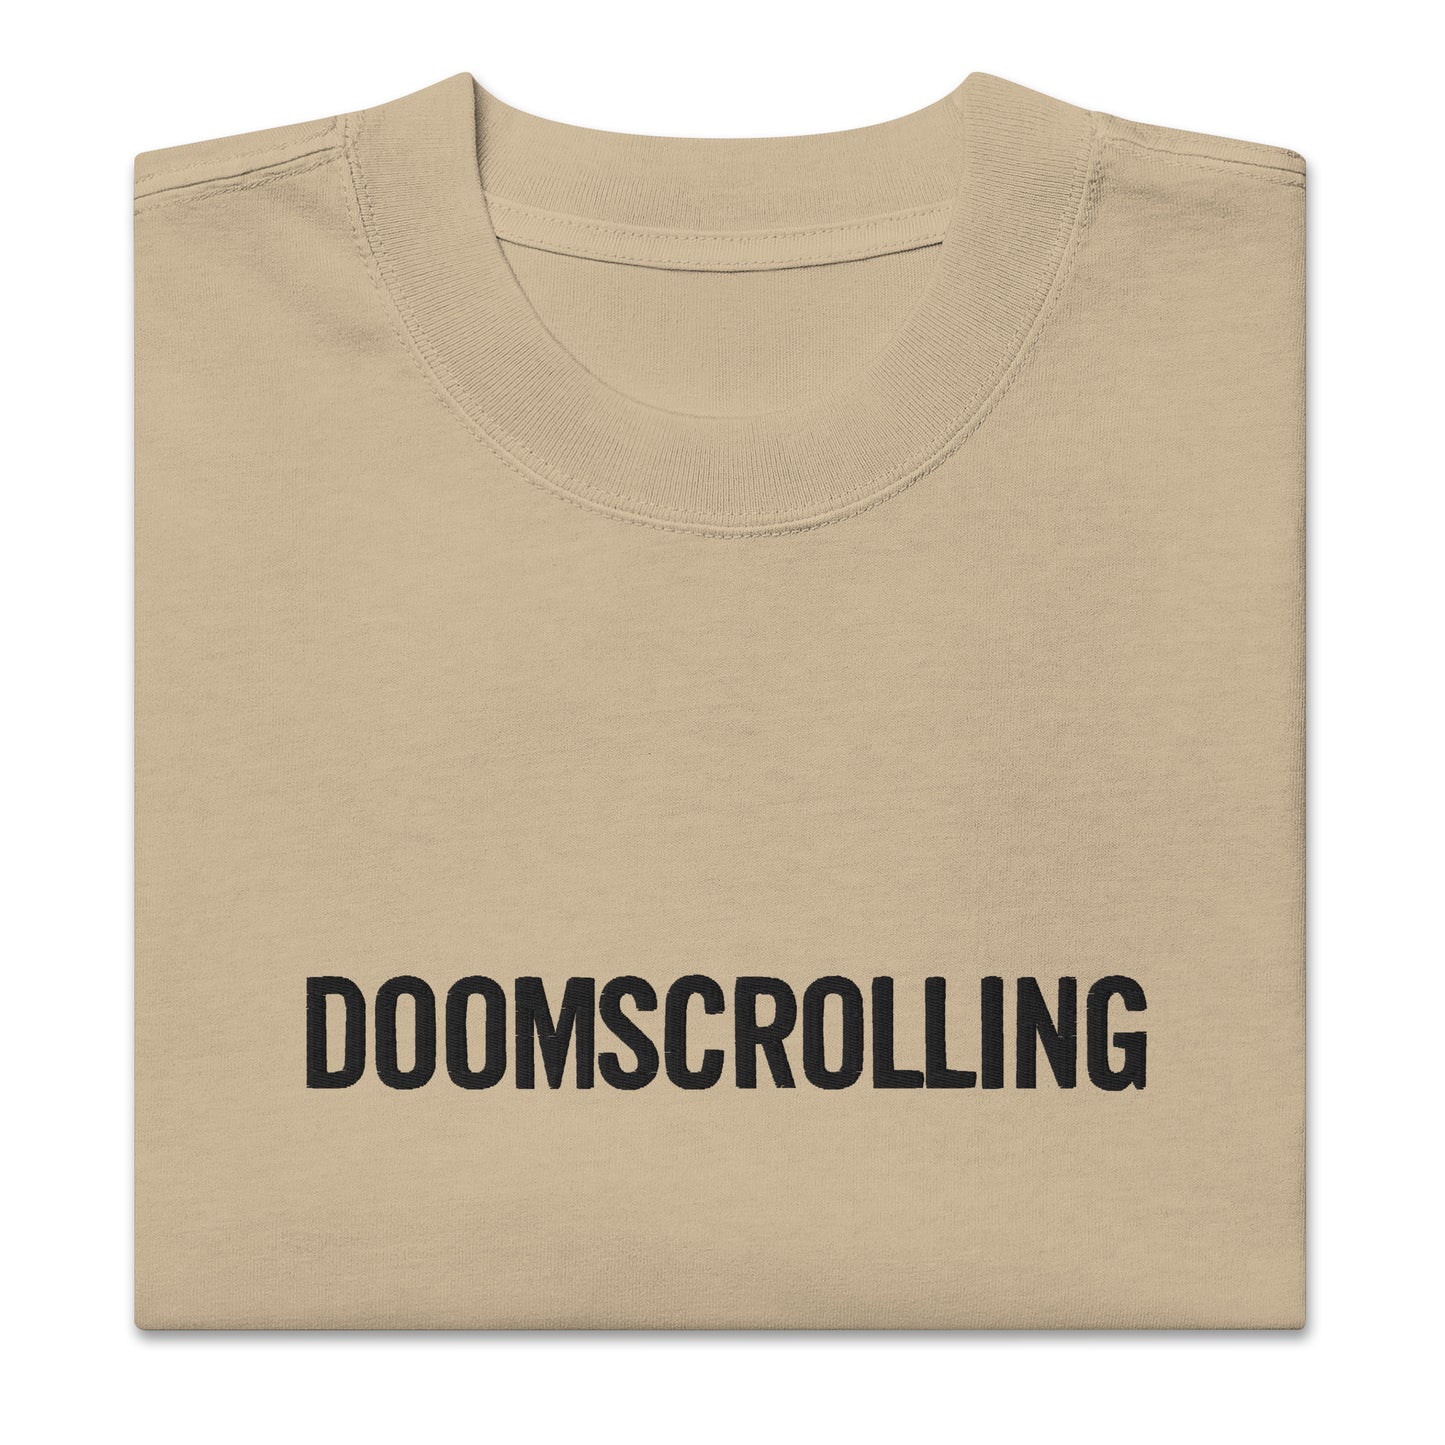 NAKID - DOOMSCROLLING - Oversized faded t-shirt